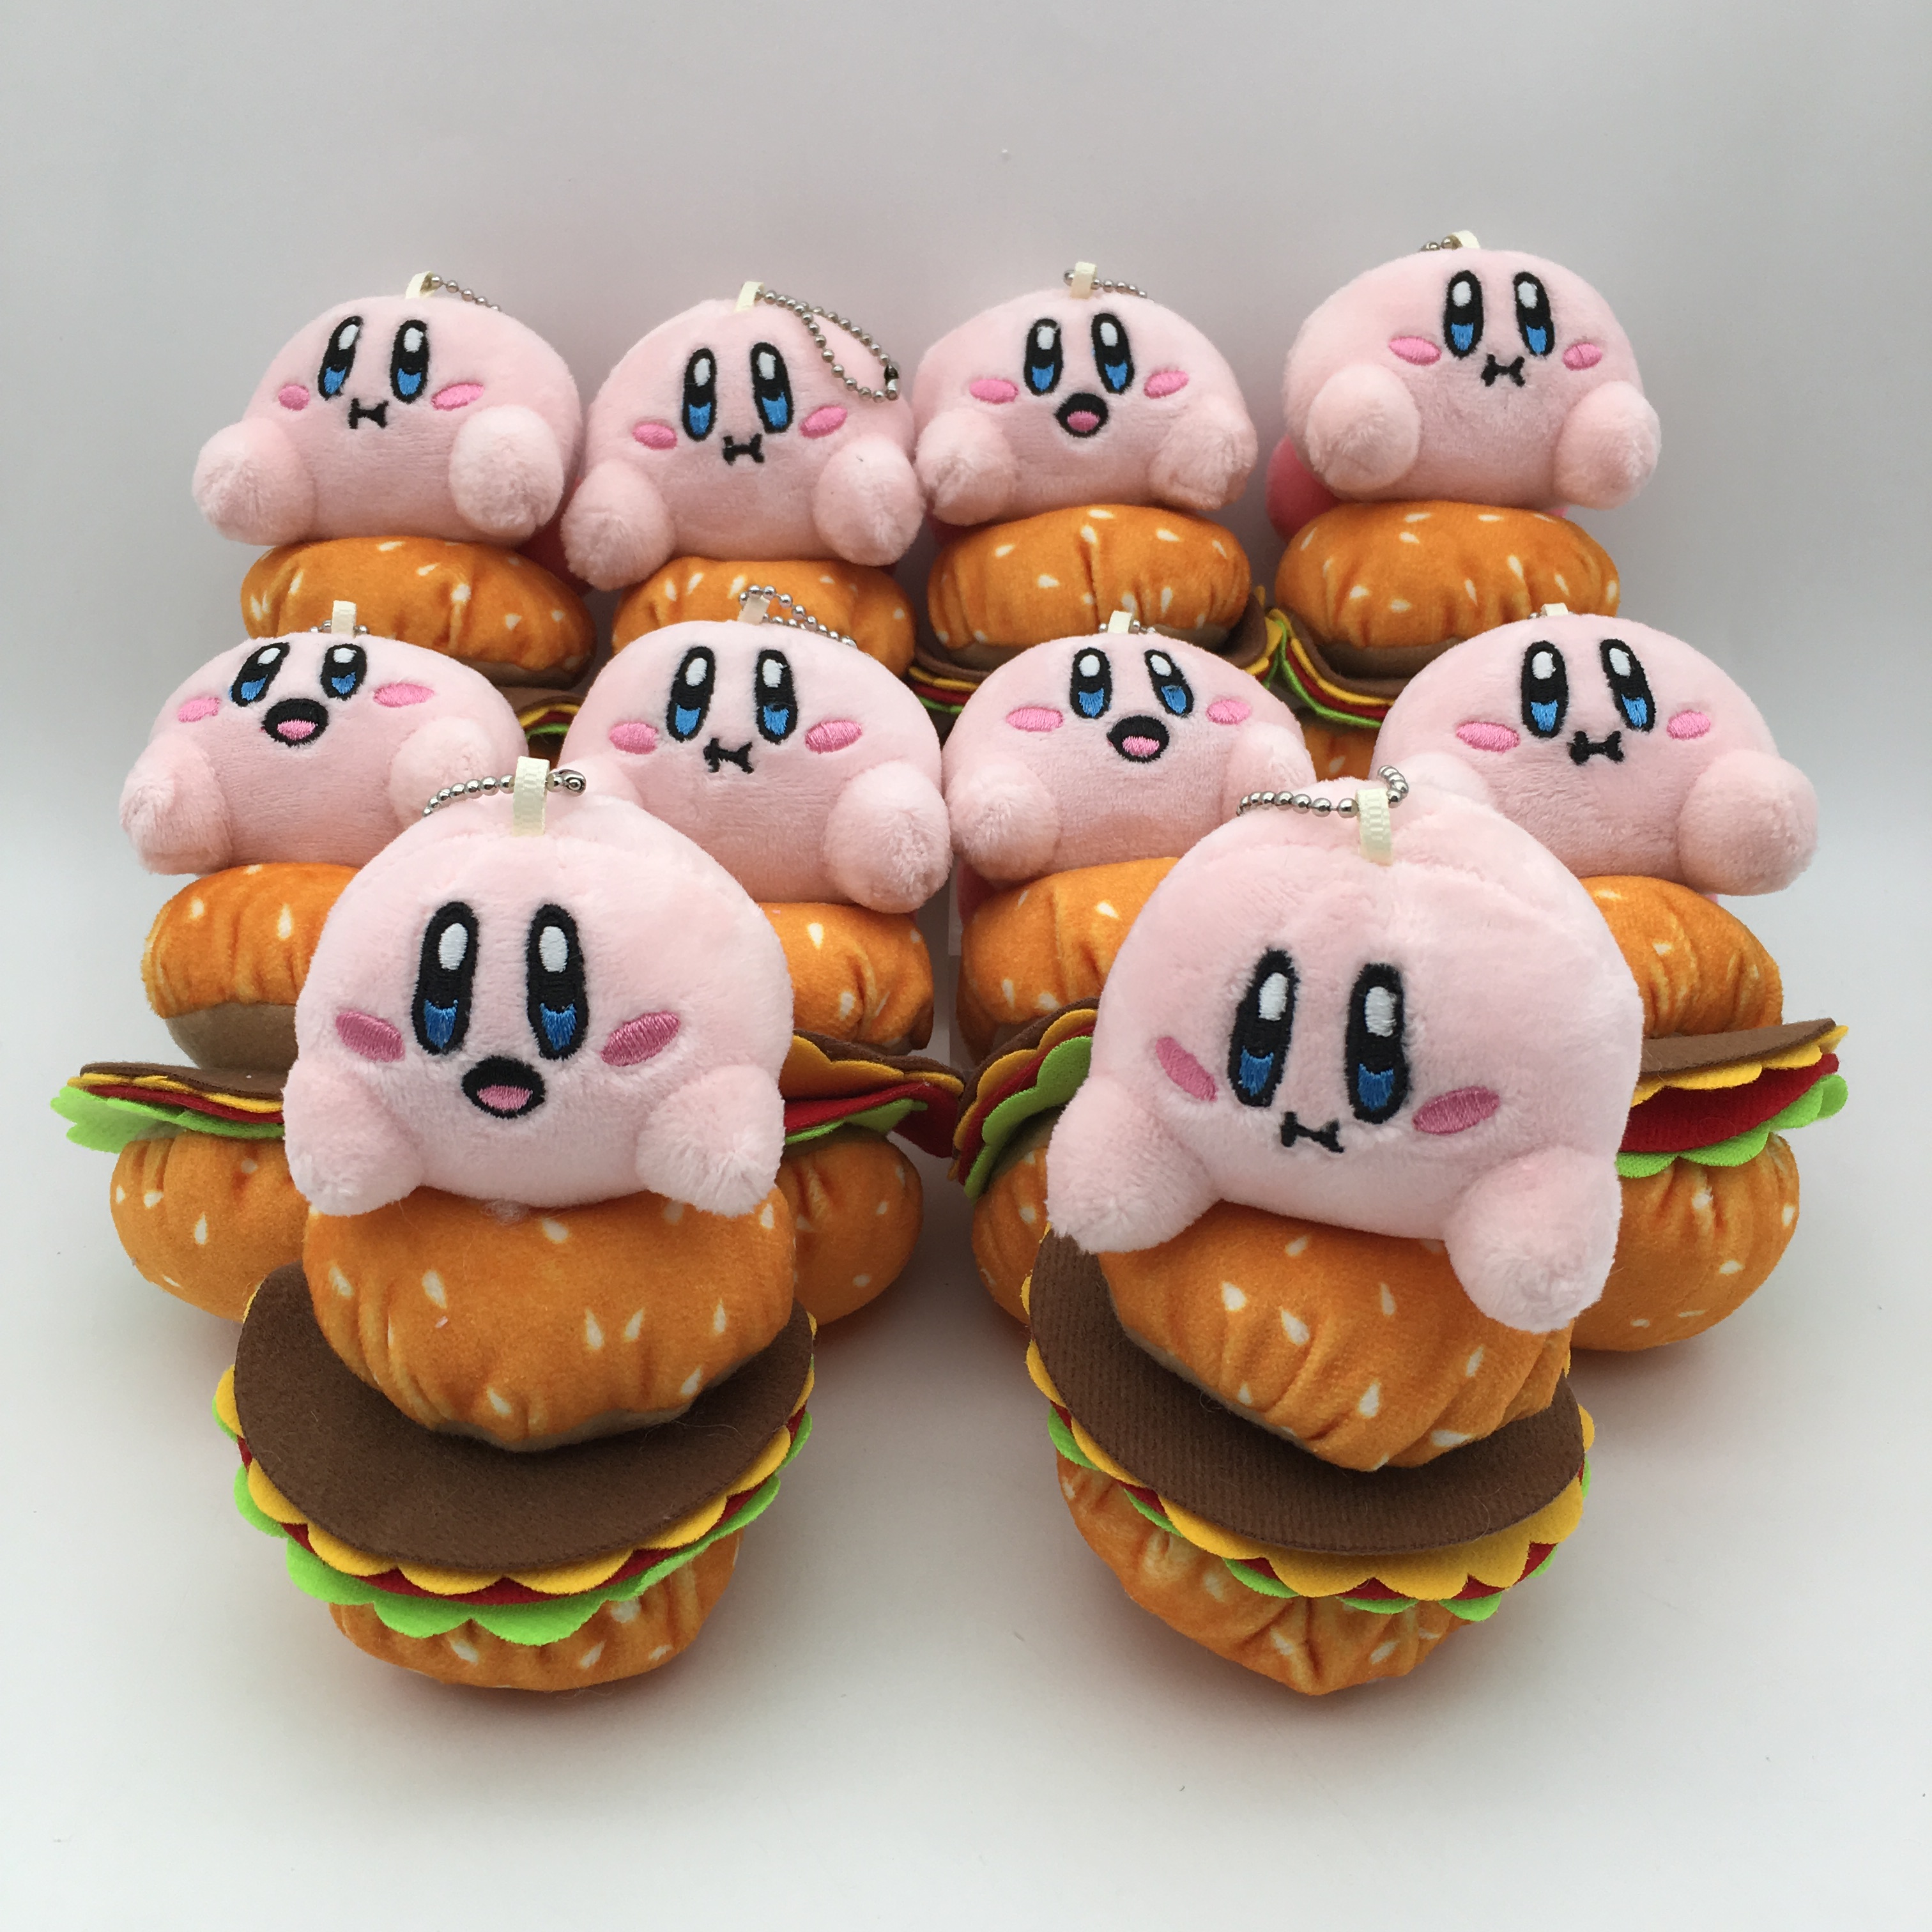 Kirby anime plush Toy，price for a set ofr 10 pcs ,12cm